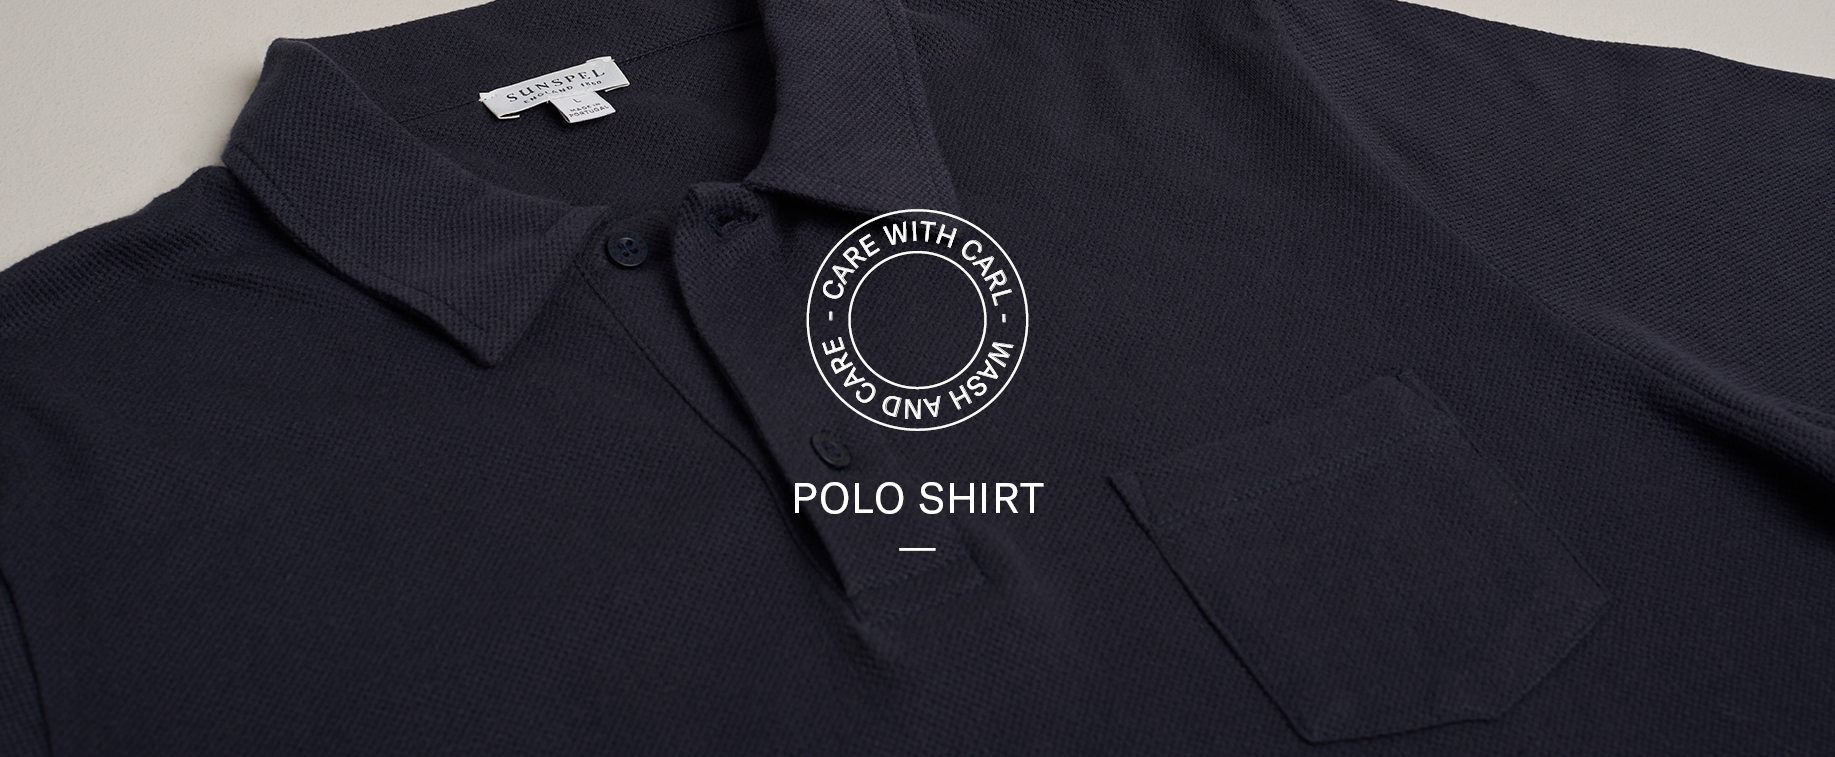 How to care for and store your polo shirt